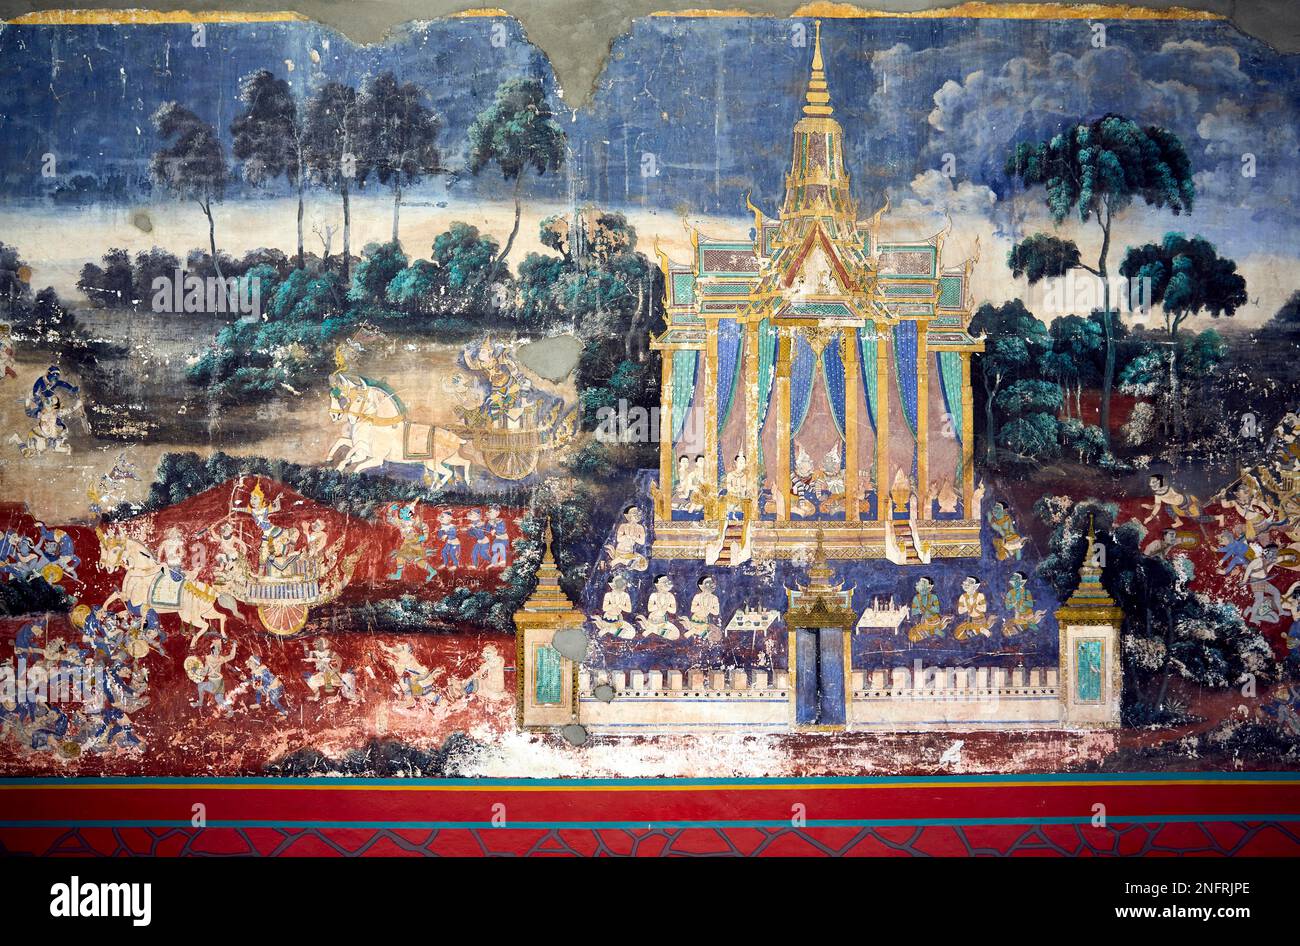 Murals of scenes from the Khmer (Reamker) version of the classic Indian epic Ramayana, Royal Palace, Phnom Penh, Cambodia Stock Photo